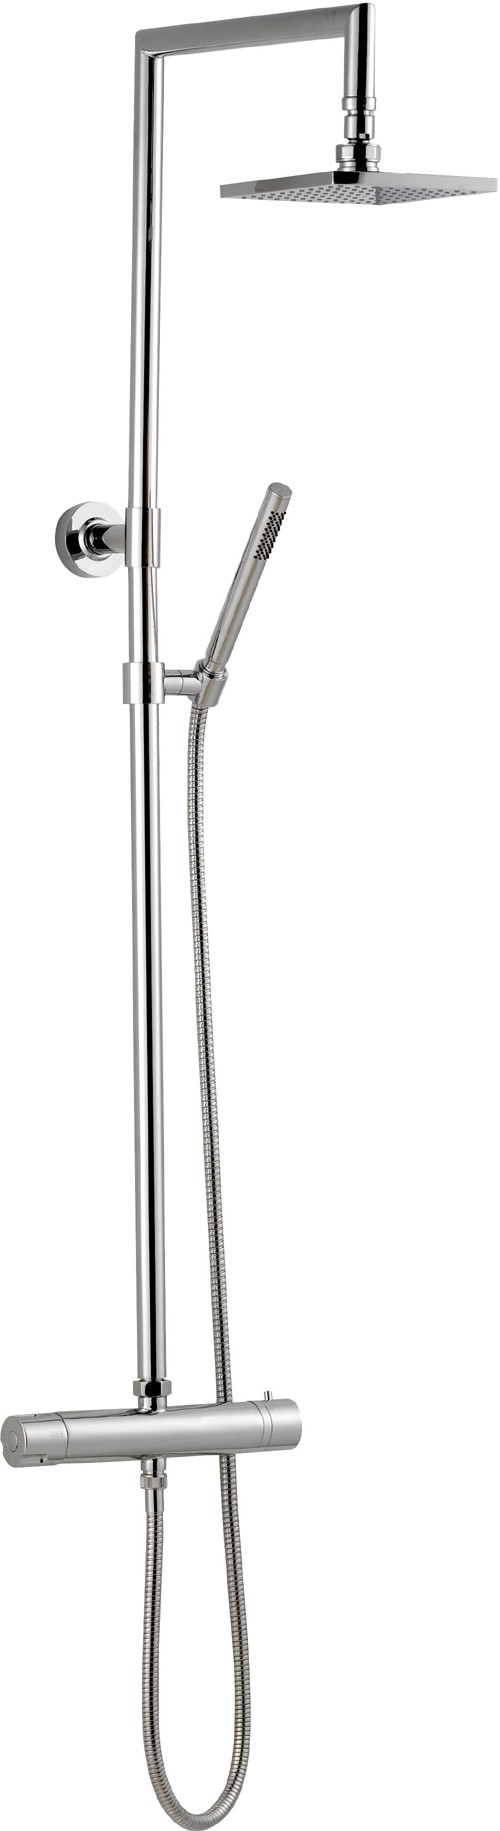 Larger image of Hudson Reed Tiamo Thermostatic Shower Set With Valve And Rigid Riser.